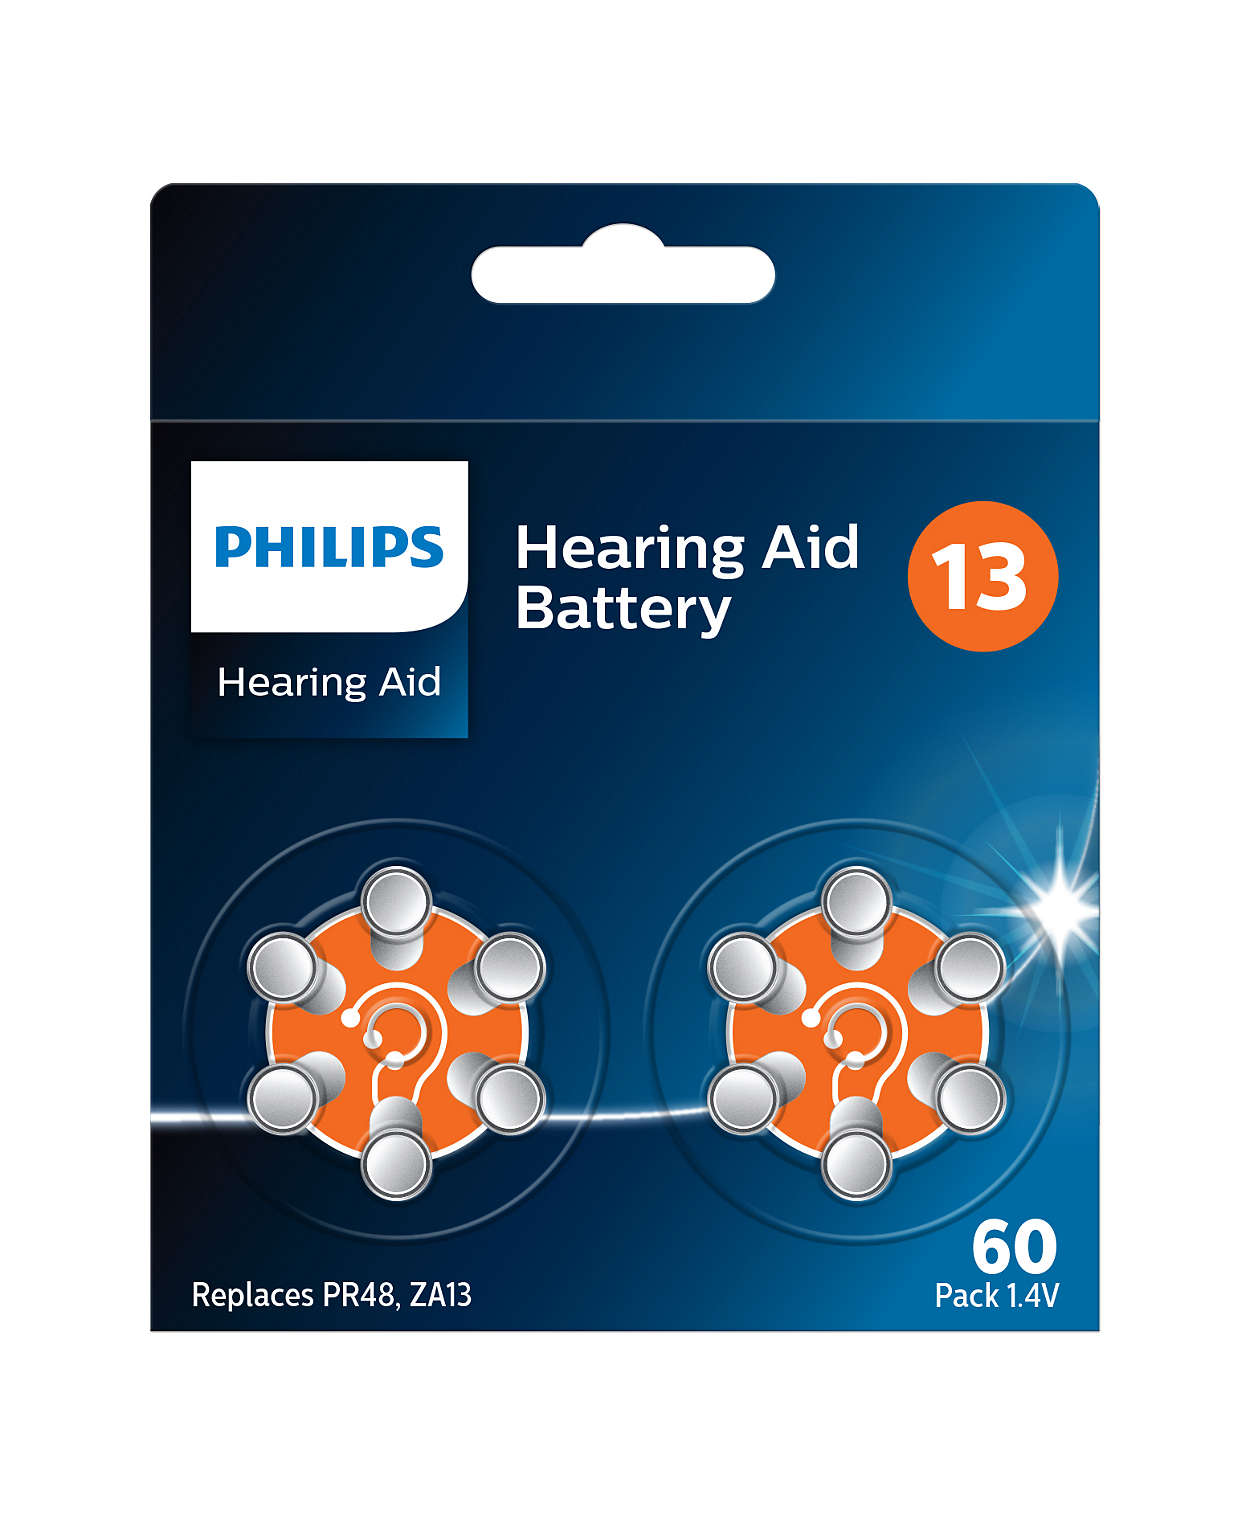 Top quality Zinc-air technology for hearing aids